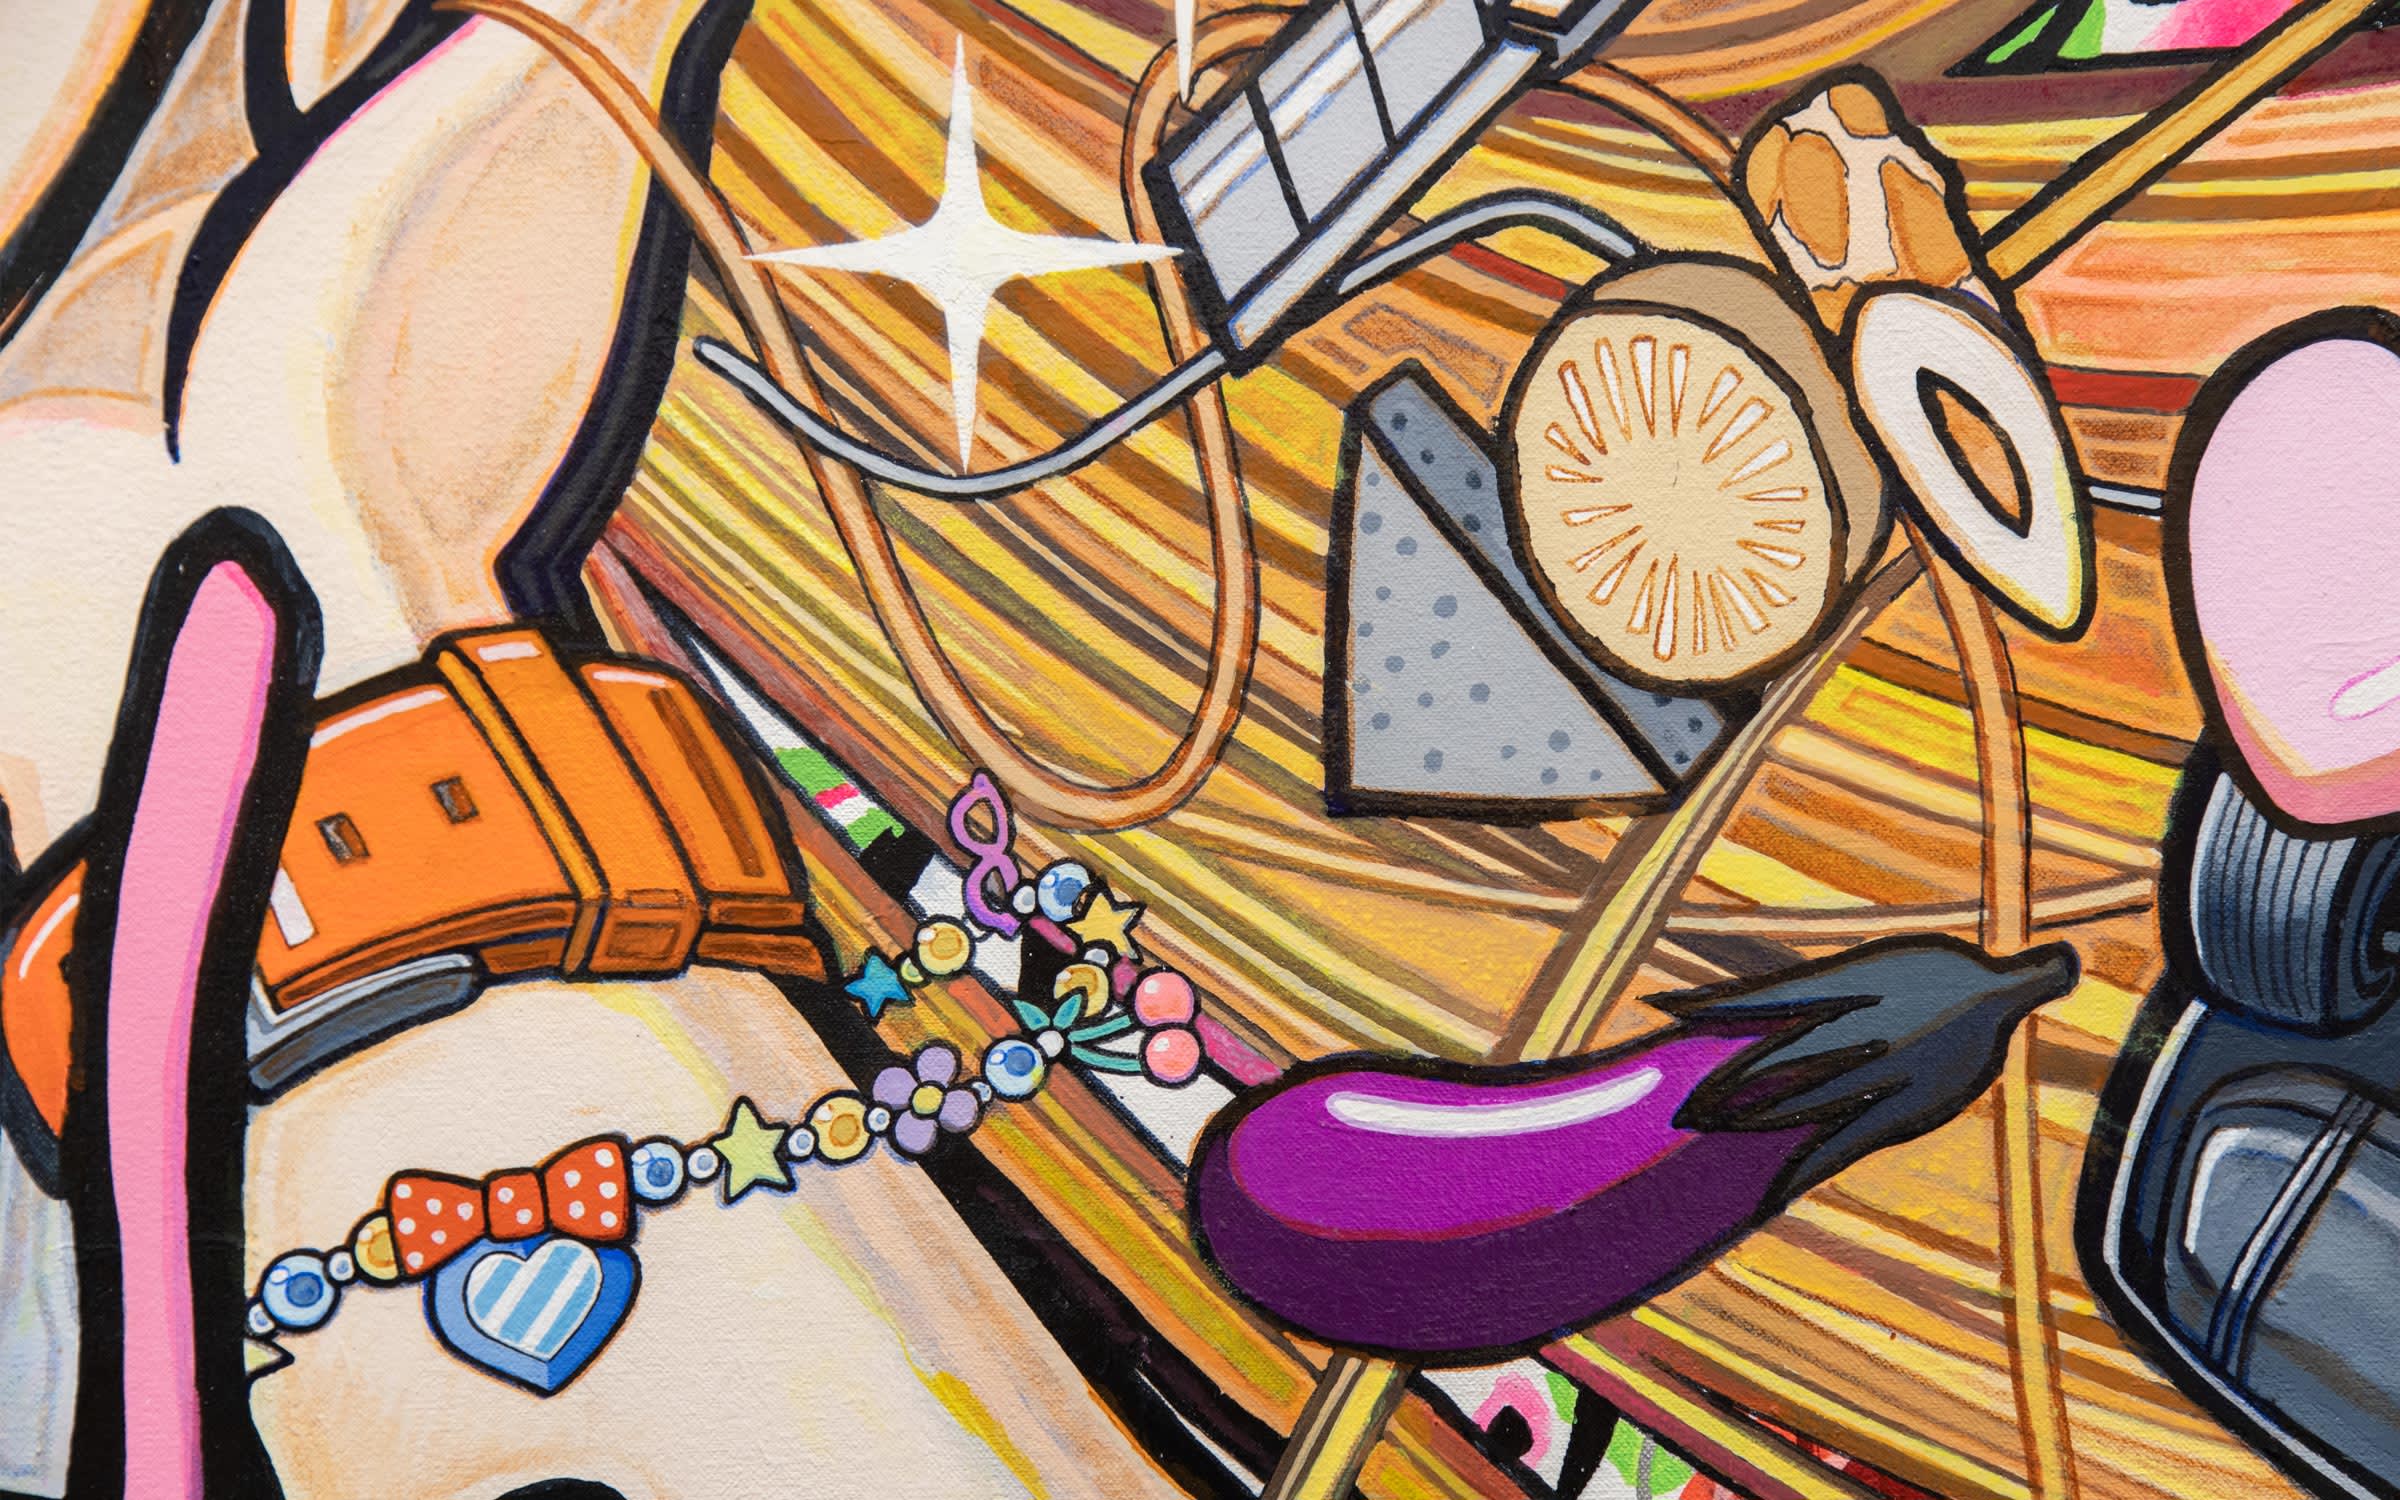 A detail from Goin To A Go-go!!, 2014, by Japanese artist Mr., on view at Kaikai Kiki Gallery, during Art Basel Hong Kong 2019.